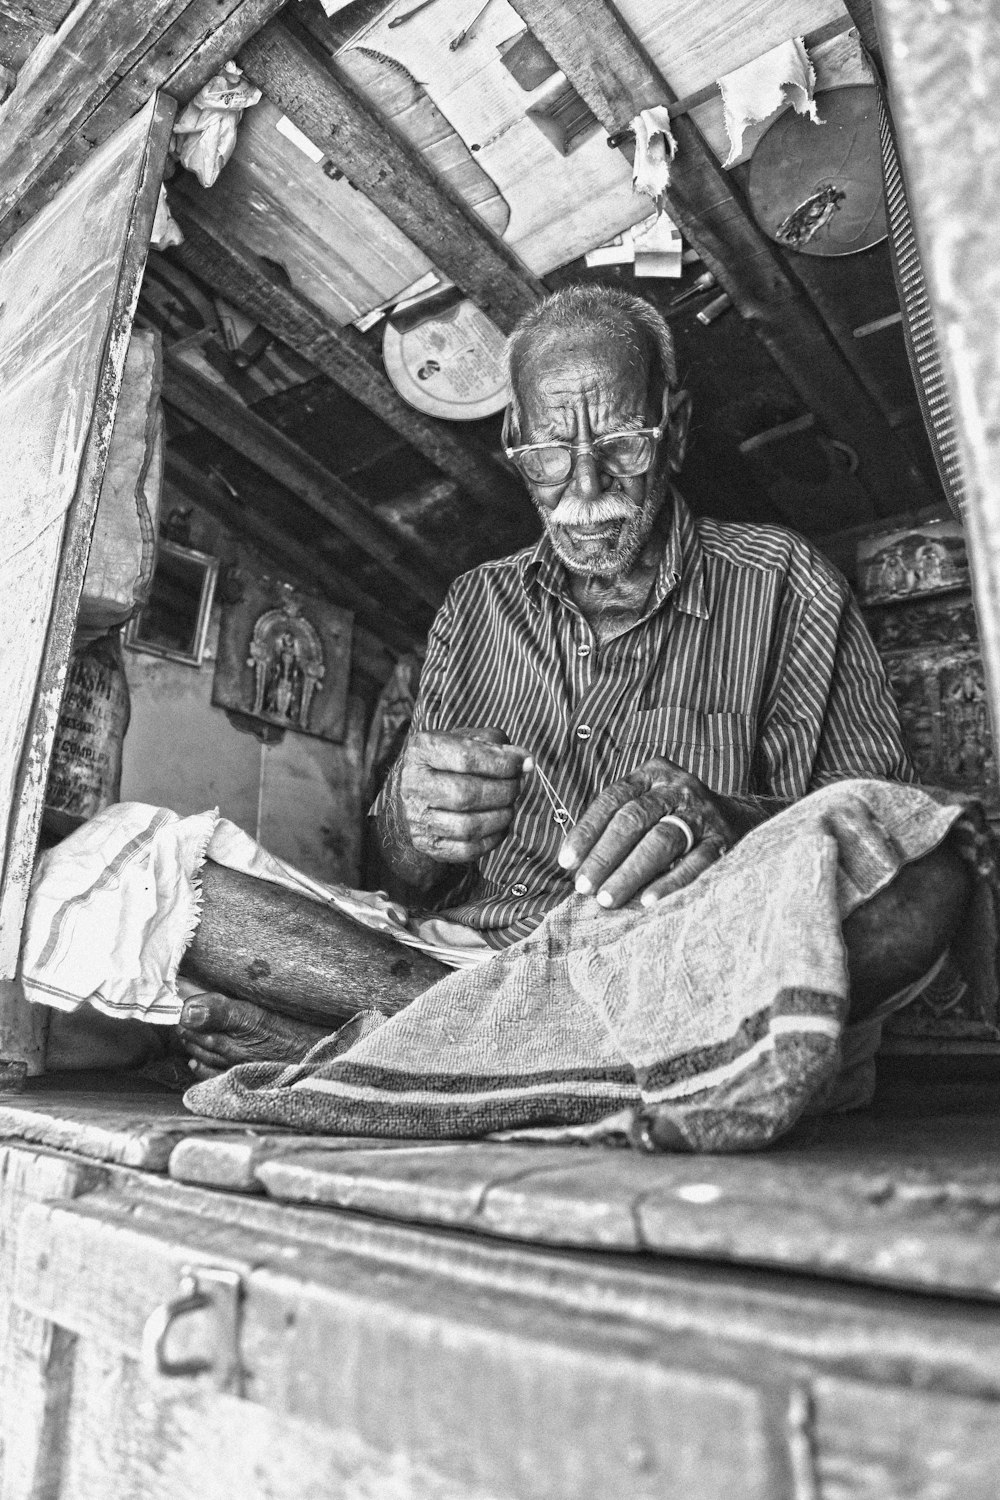 grayscale photo of man sewing textile while sitting on floor